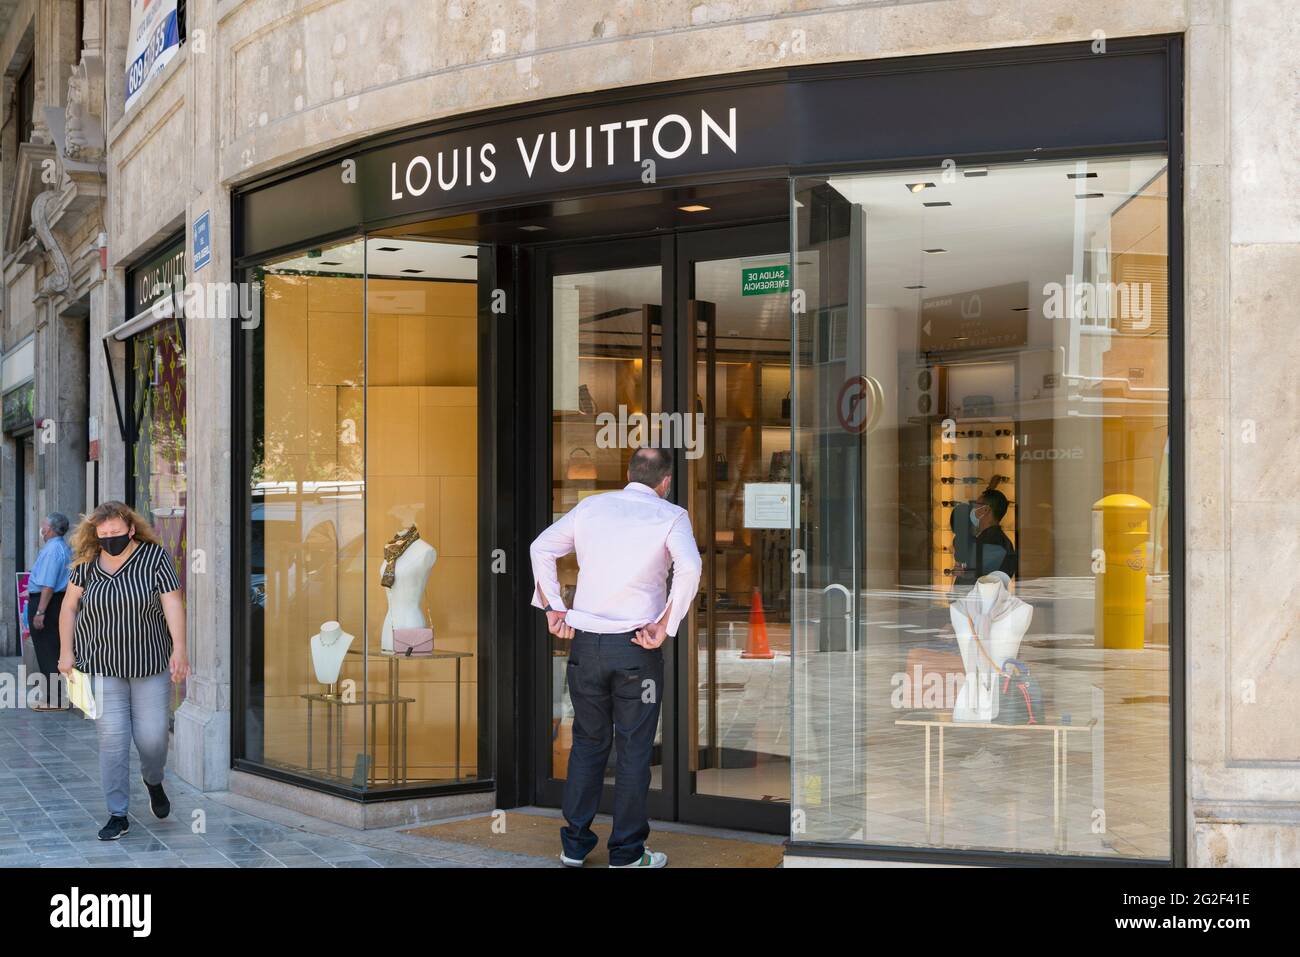 Louis Vuitton Valencia High Resolution Stock Photography and Images - Alamy